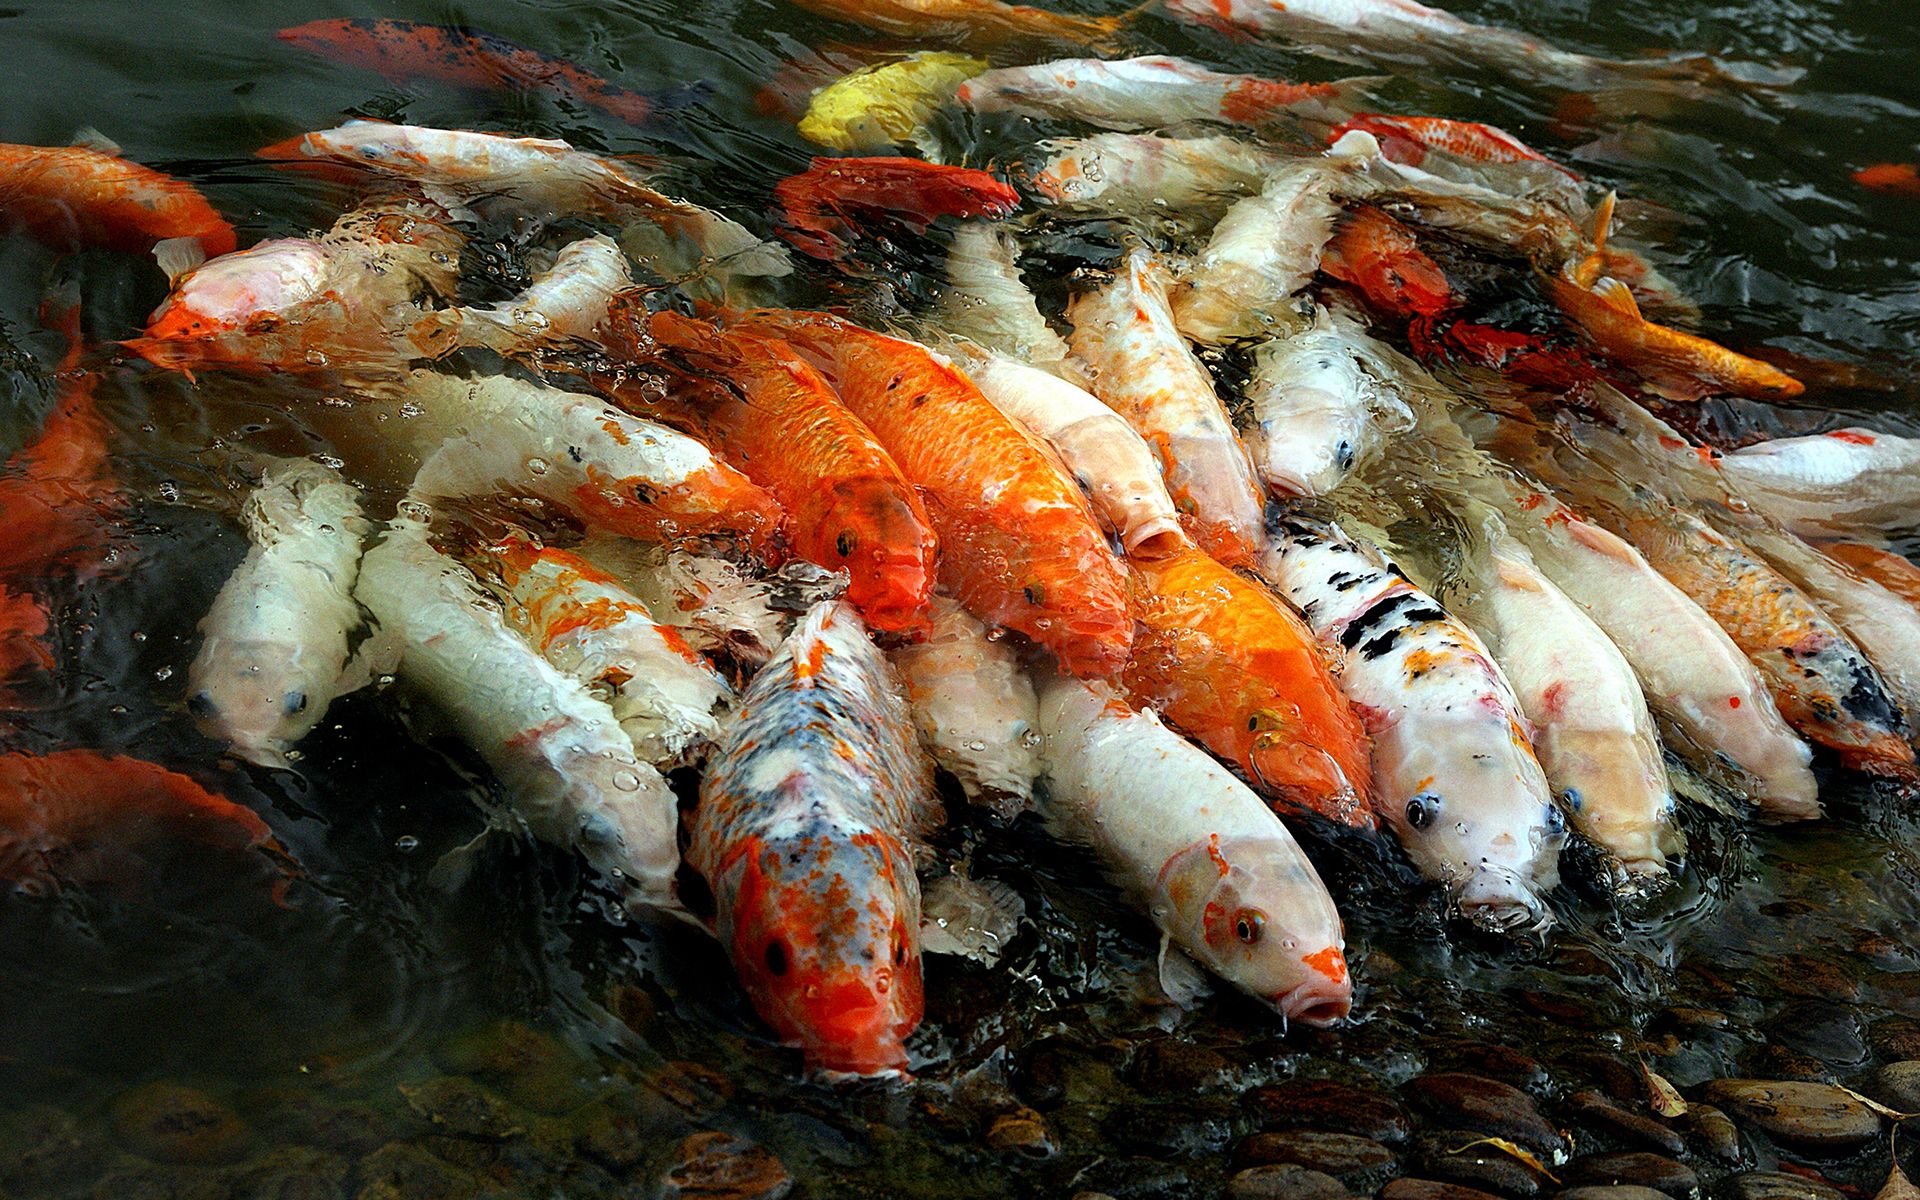 Mobile wallpaper: Koi Fish, Koi, Fishes, Fish, Animal, 337316 download the picture for free